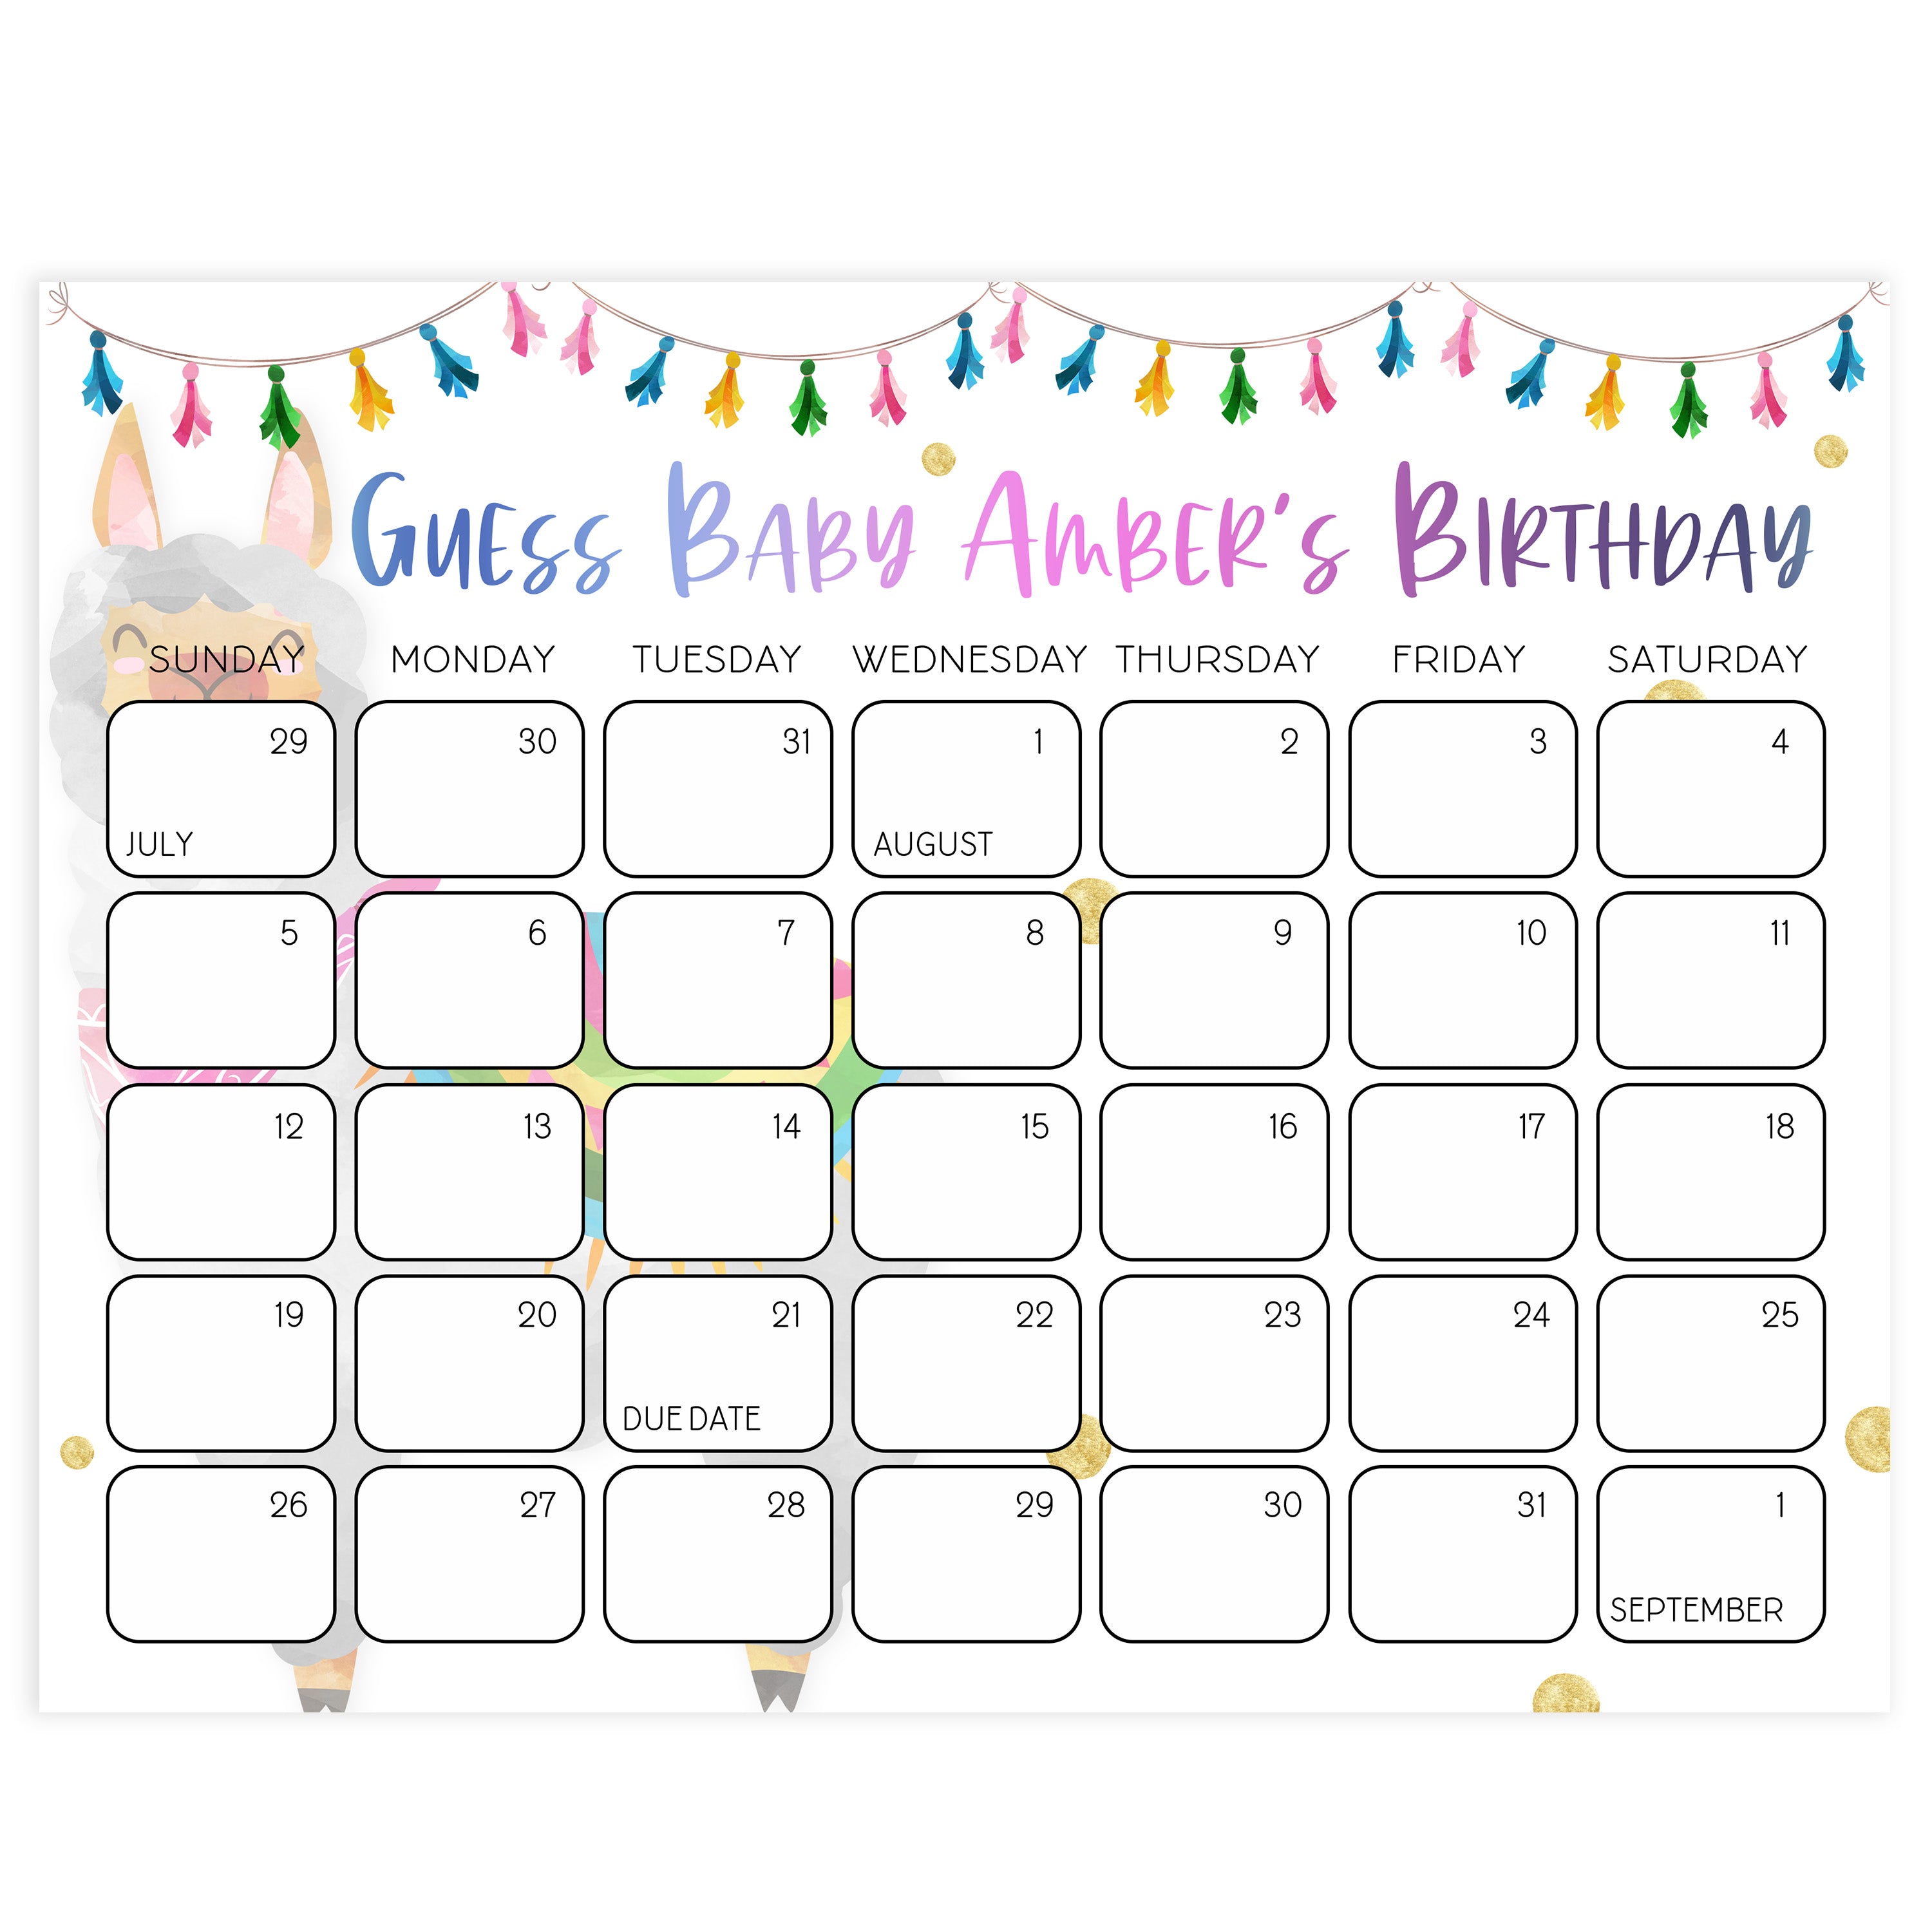 guess the baby birthday game, baby birthday predictions, Printable baby shower games, llama fiesta fun baby games, baby shower games, fun baby shower ideas, top baby shower ideas, Llama fiesta shower baby shower, fiesta baby shower ideas